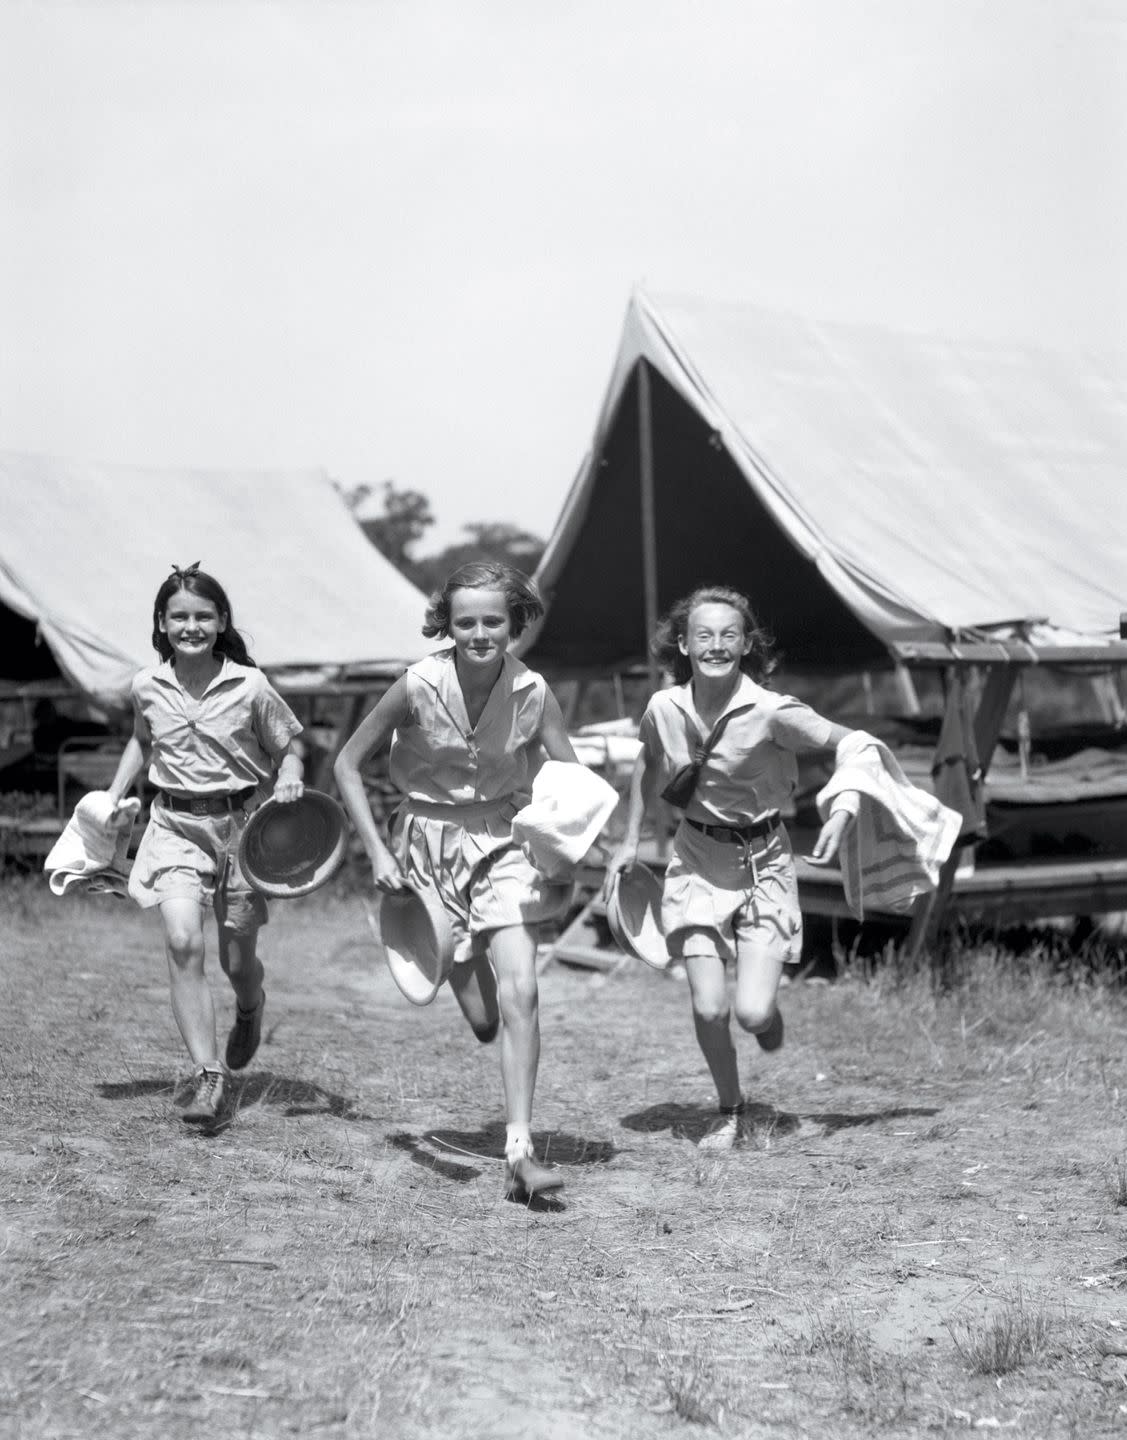 1930s three teen girls wearing camp shorts shirts running from tents while holding towels wash basins photo by h armstrong robertsclassicstockgetty images